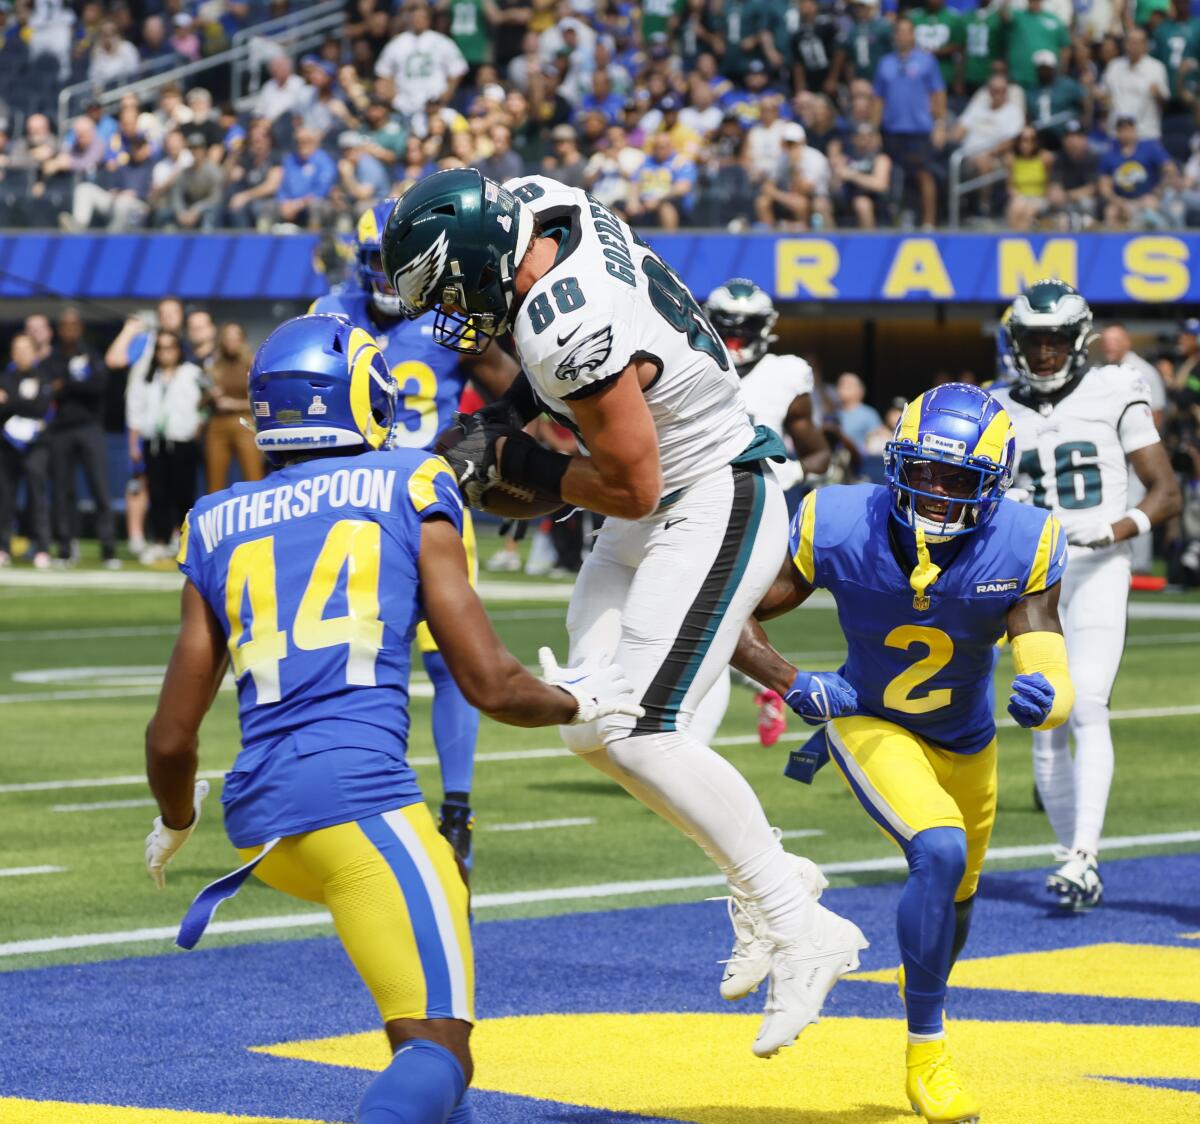 Philadelphia tight end Dallas Goedert catches a touchdown pass from Jalen Hurts in the first quarter Sunday.